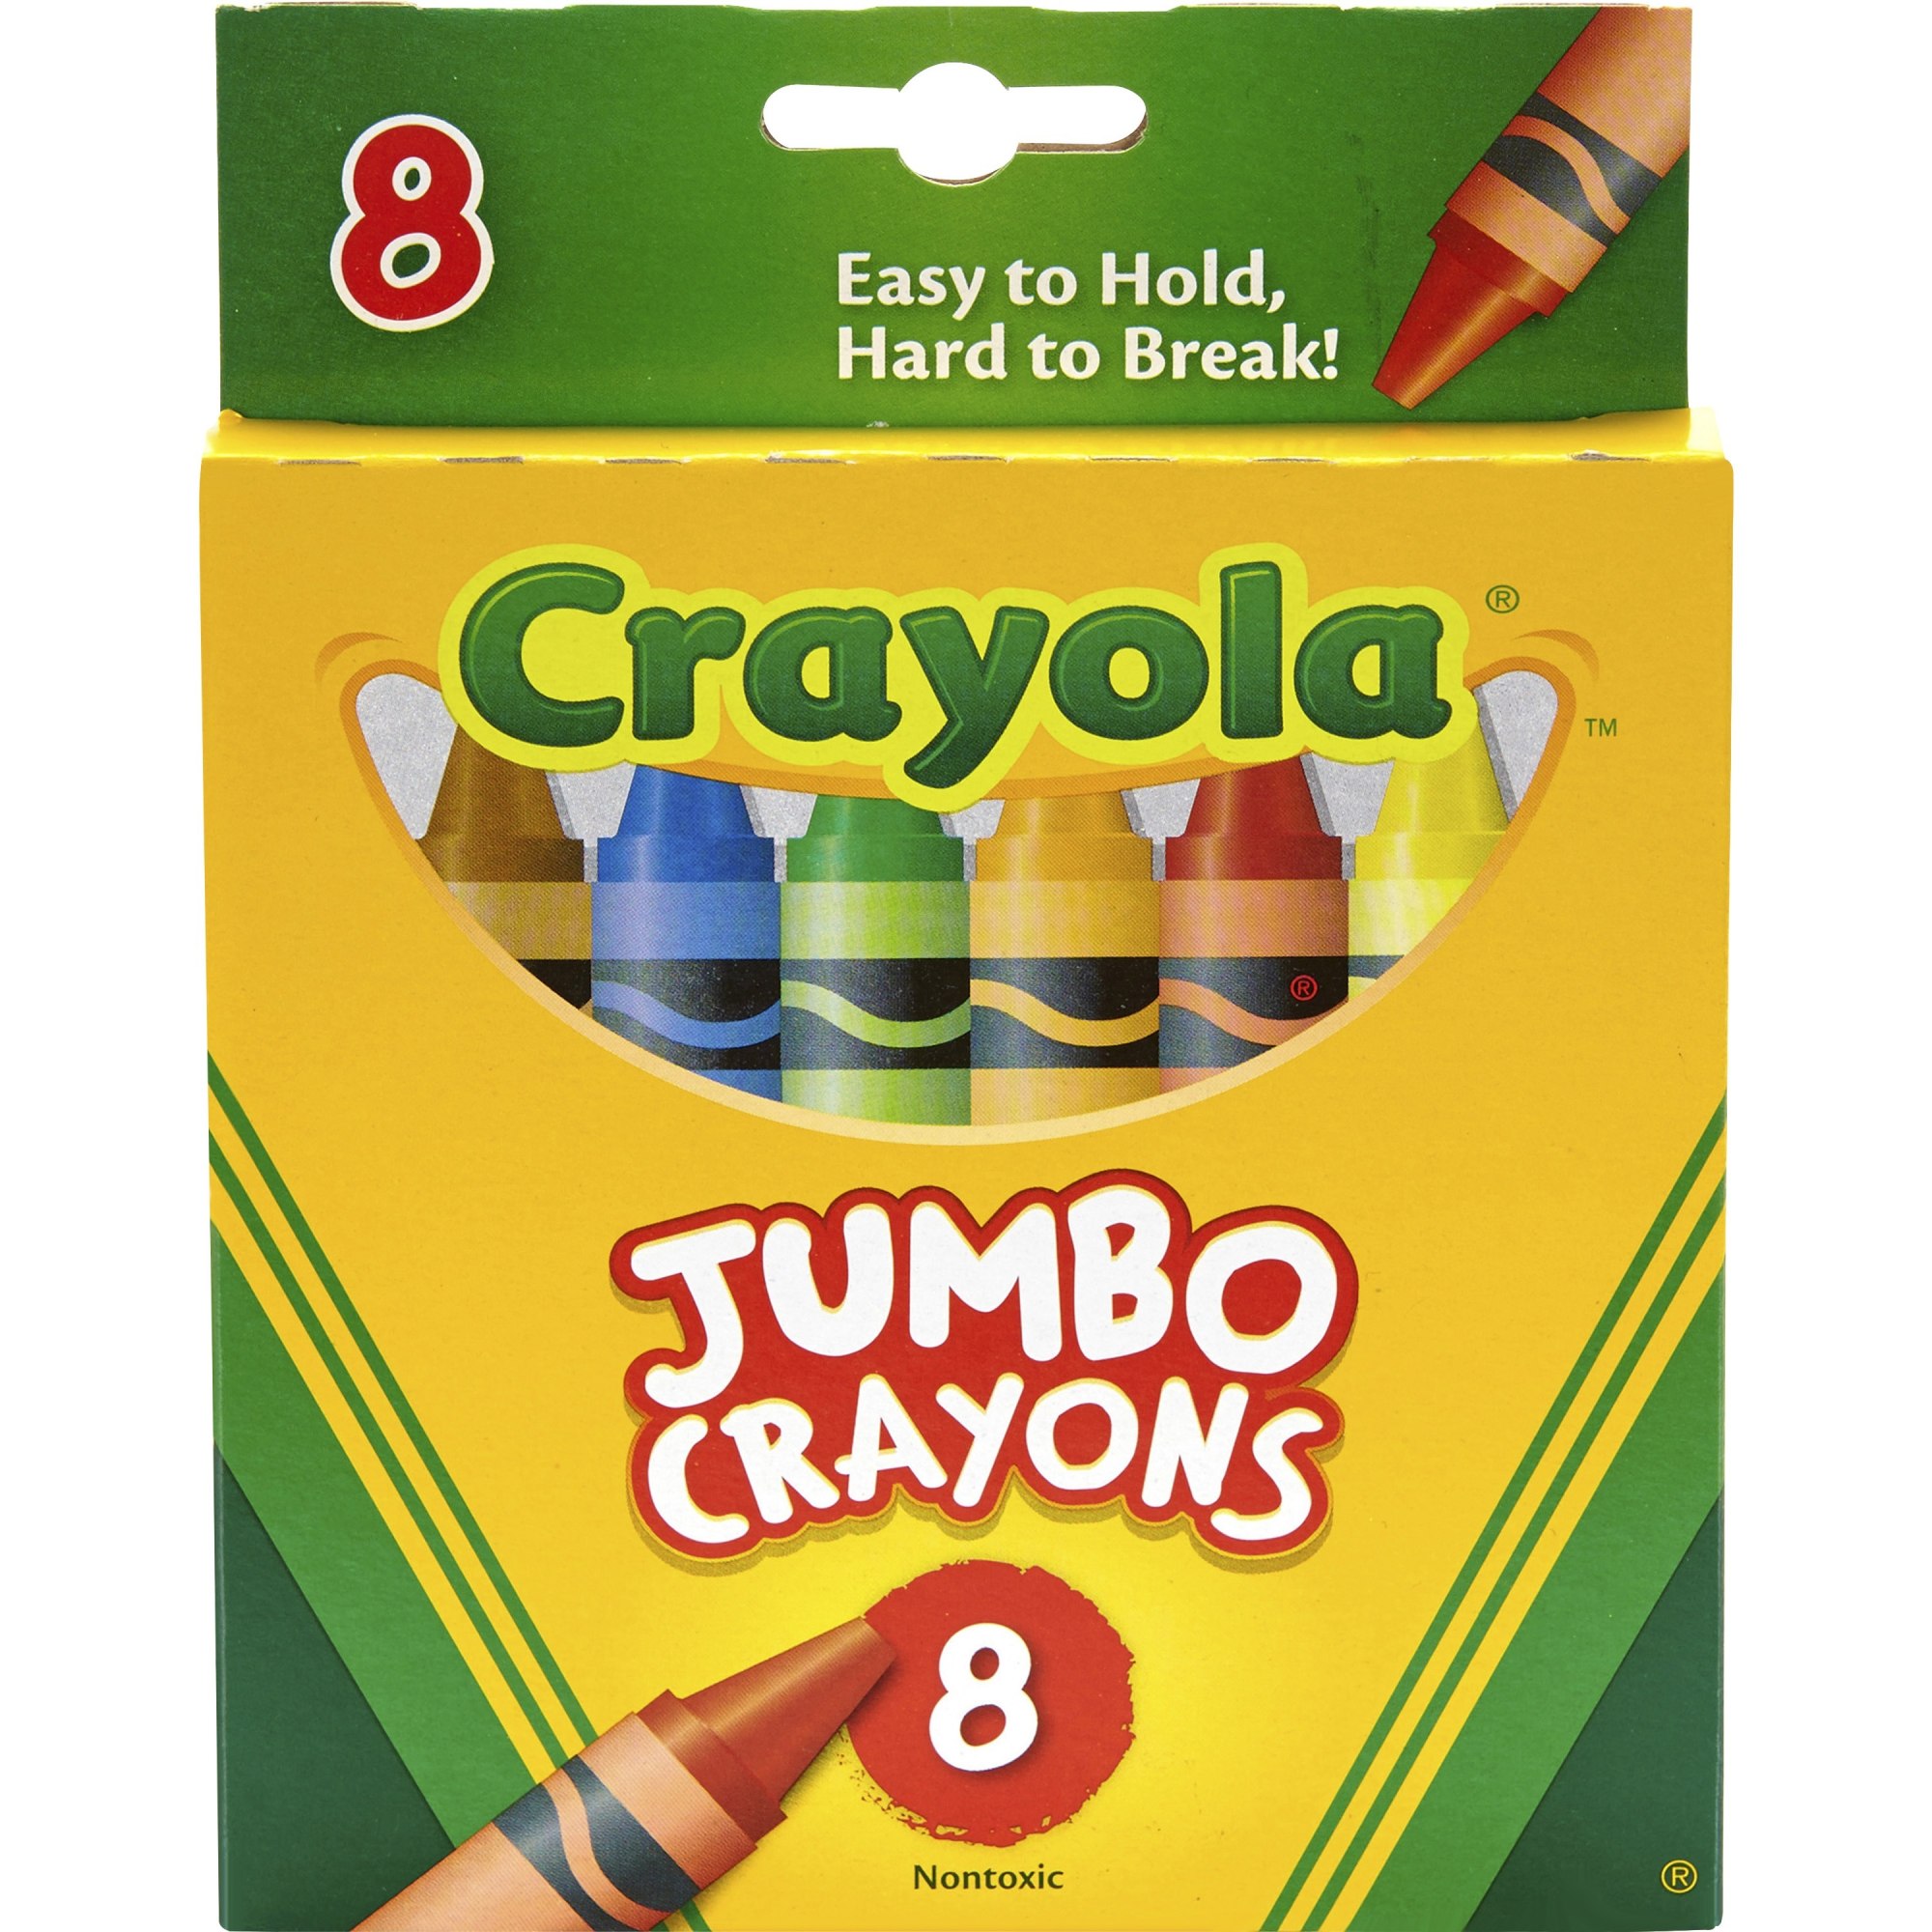 Crayola Jumbo Size Crayons for Toddlers, 8 Count, Easter Basket Stuffers for Toddlers, Gifts - image 5 of 10